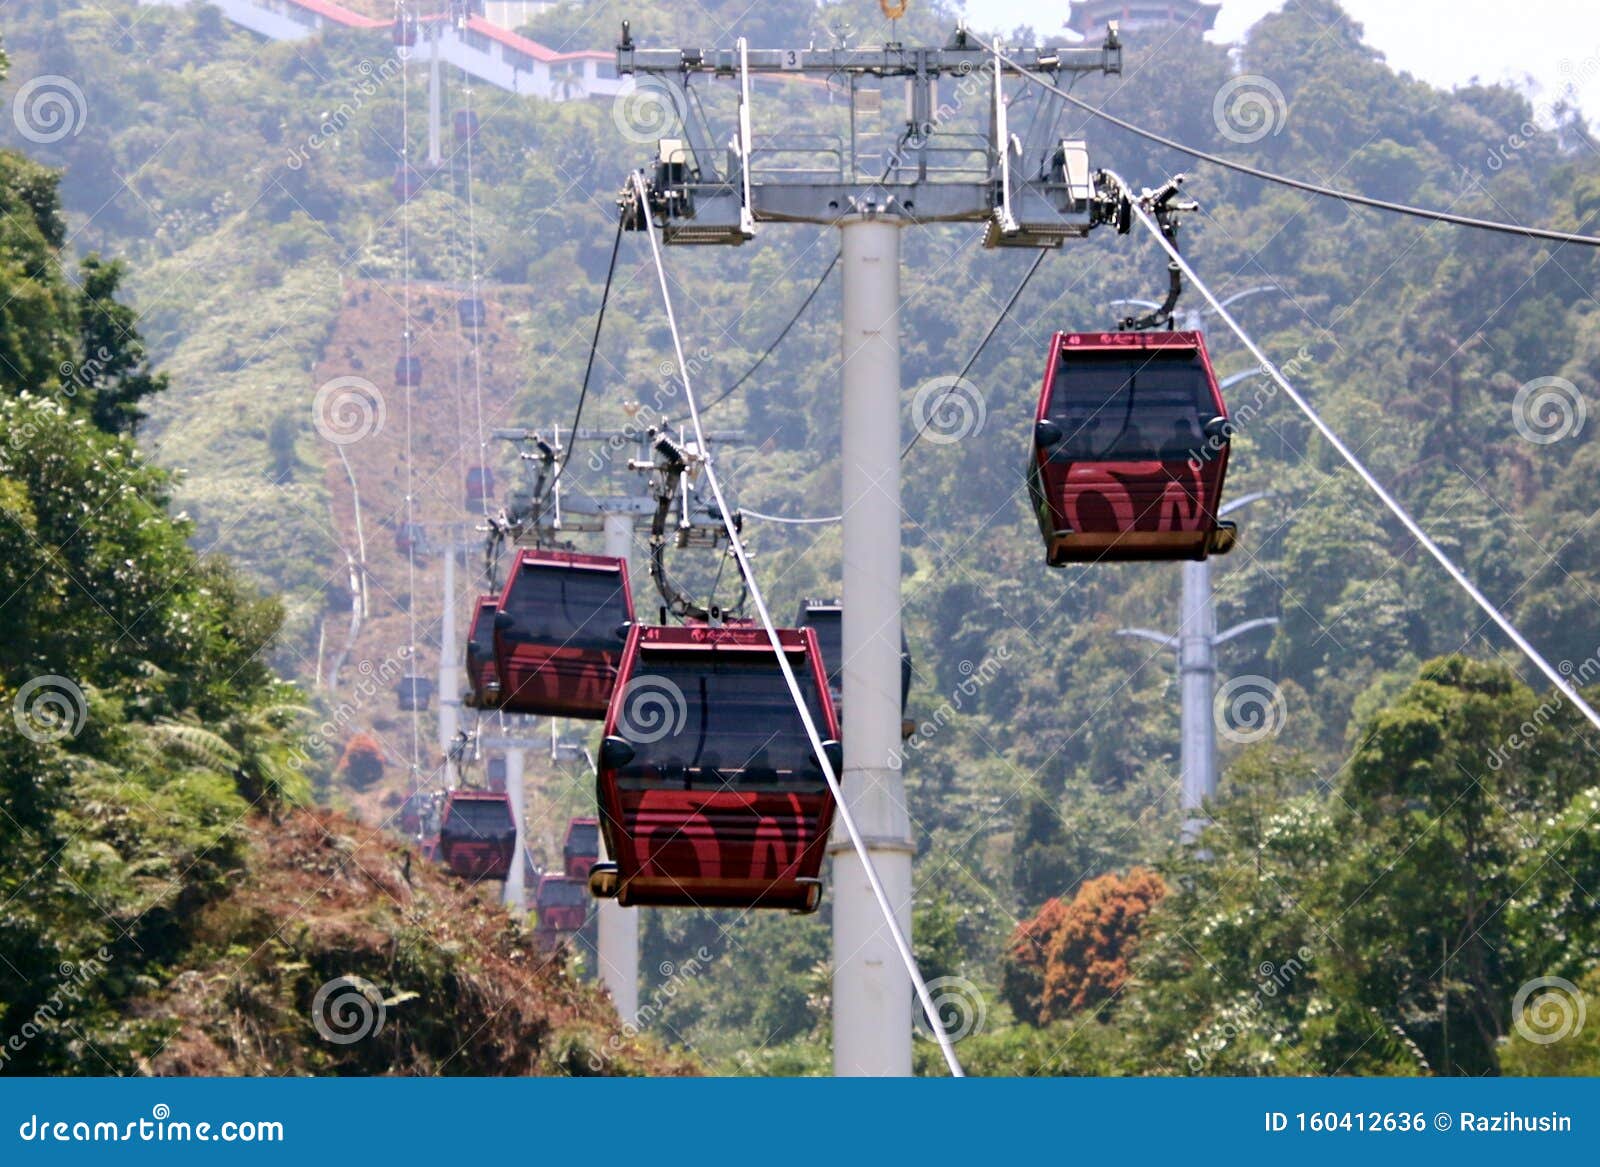 Genting cable car